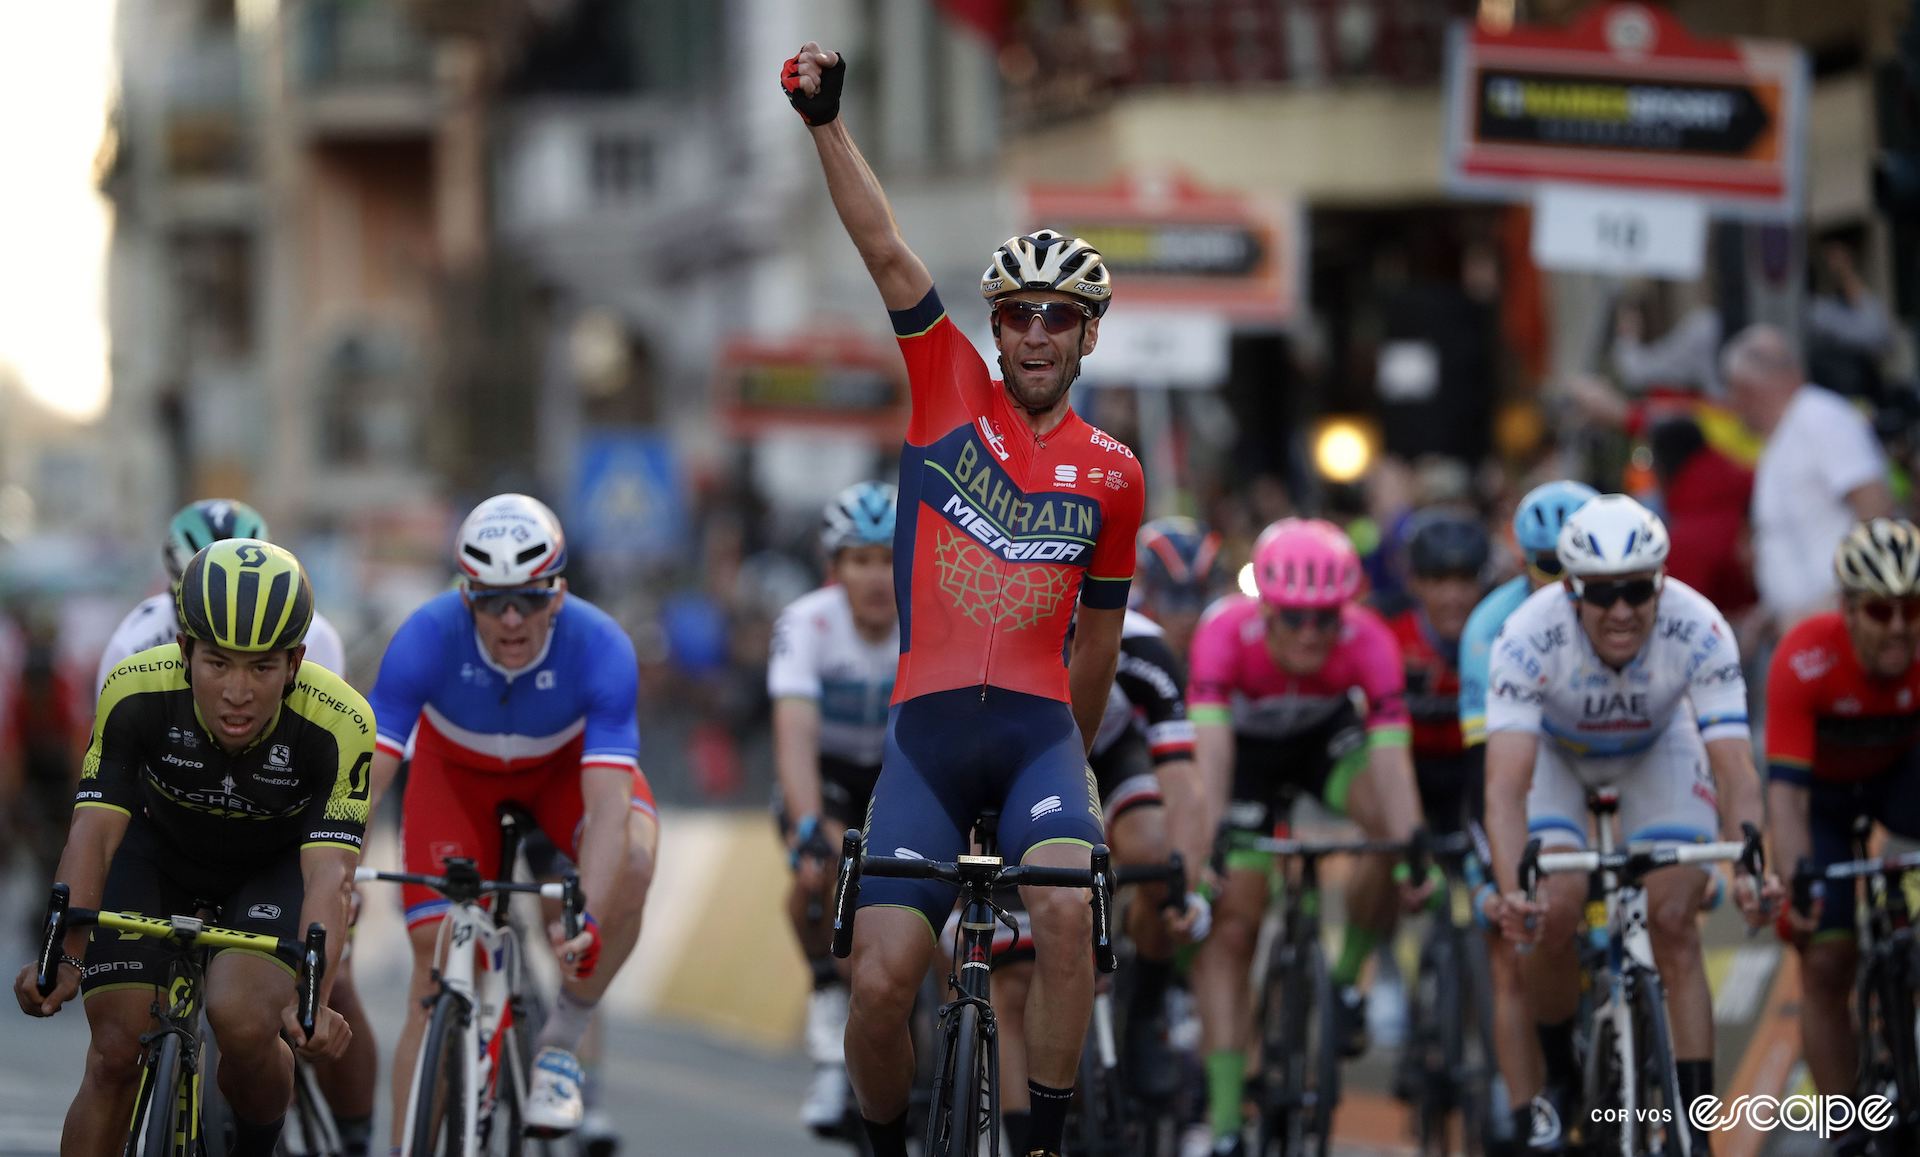 Vincenzo Nibali celebrates winning Milan-San Remo while a dejected Caleb Ewan leads the bunch across the line in second.